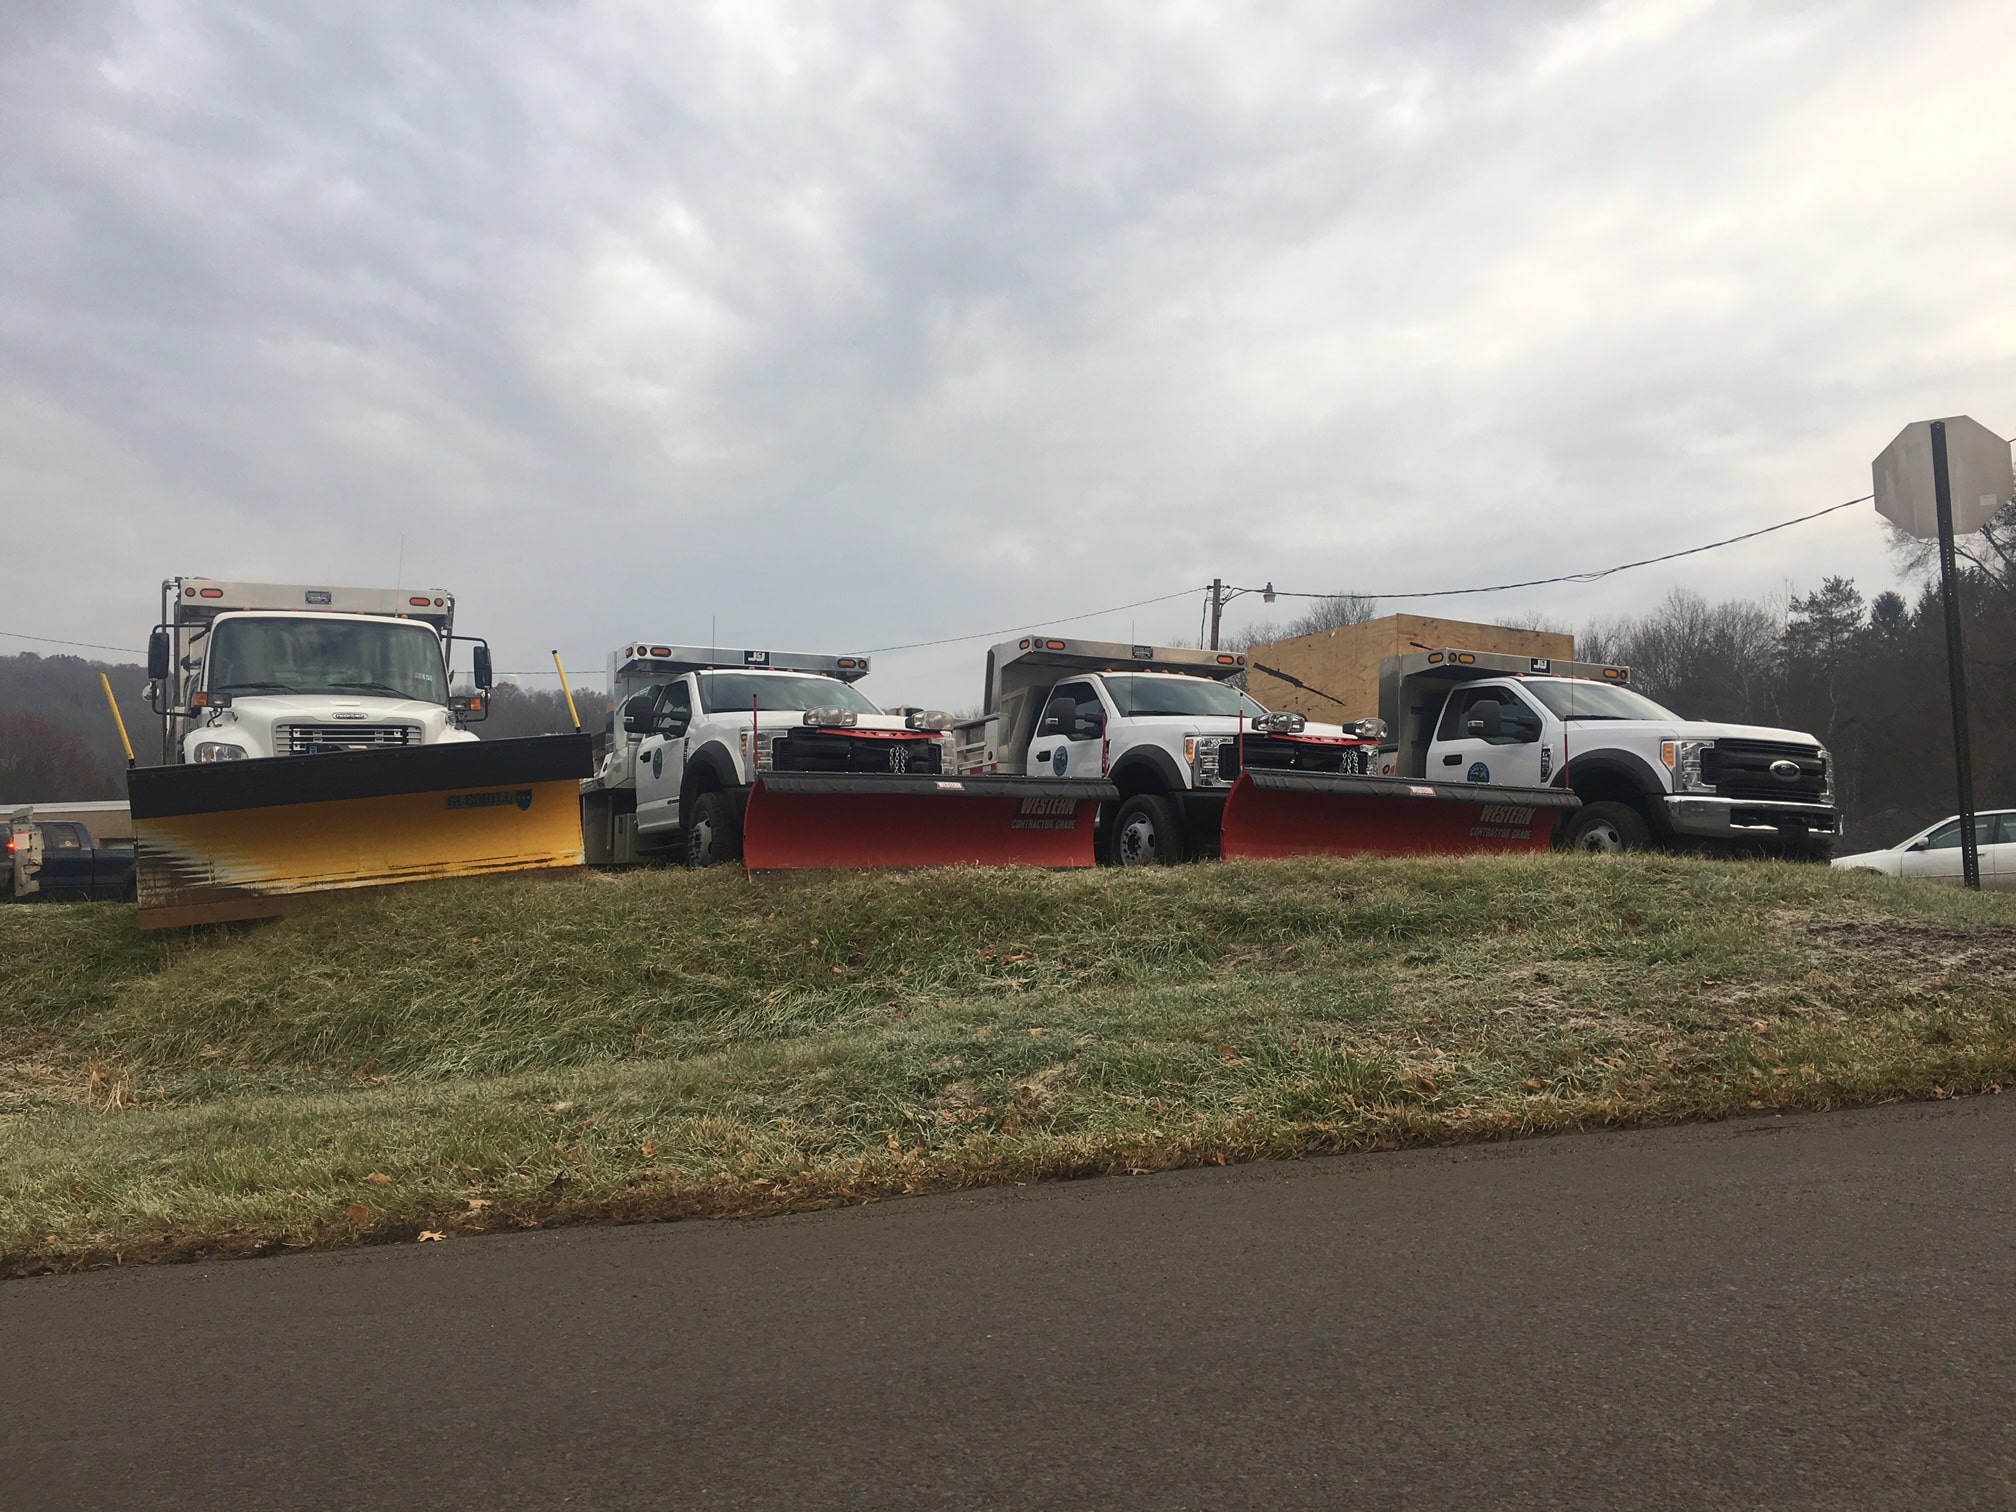 public works trucks lined up